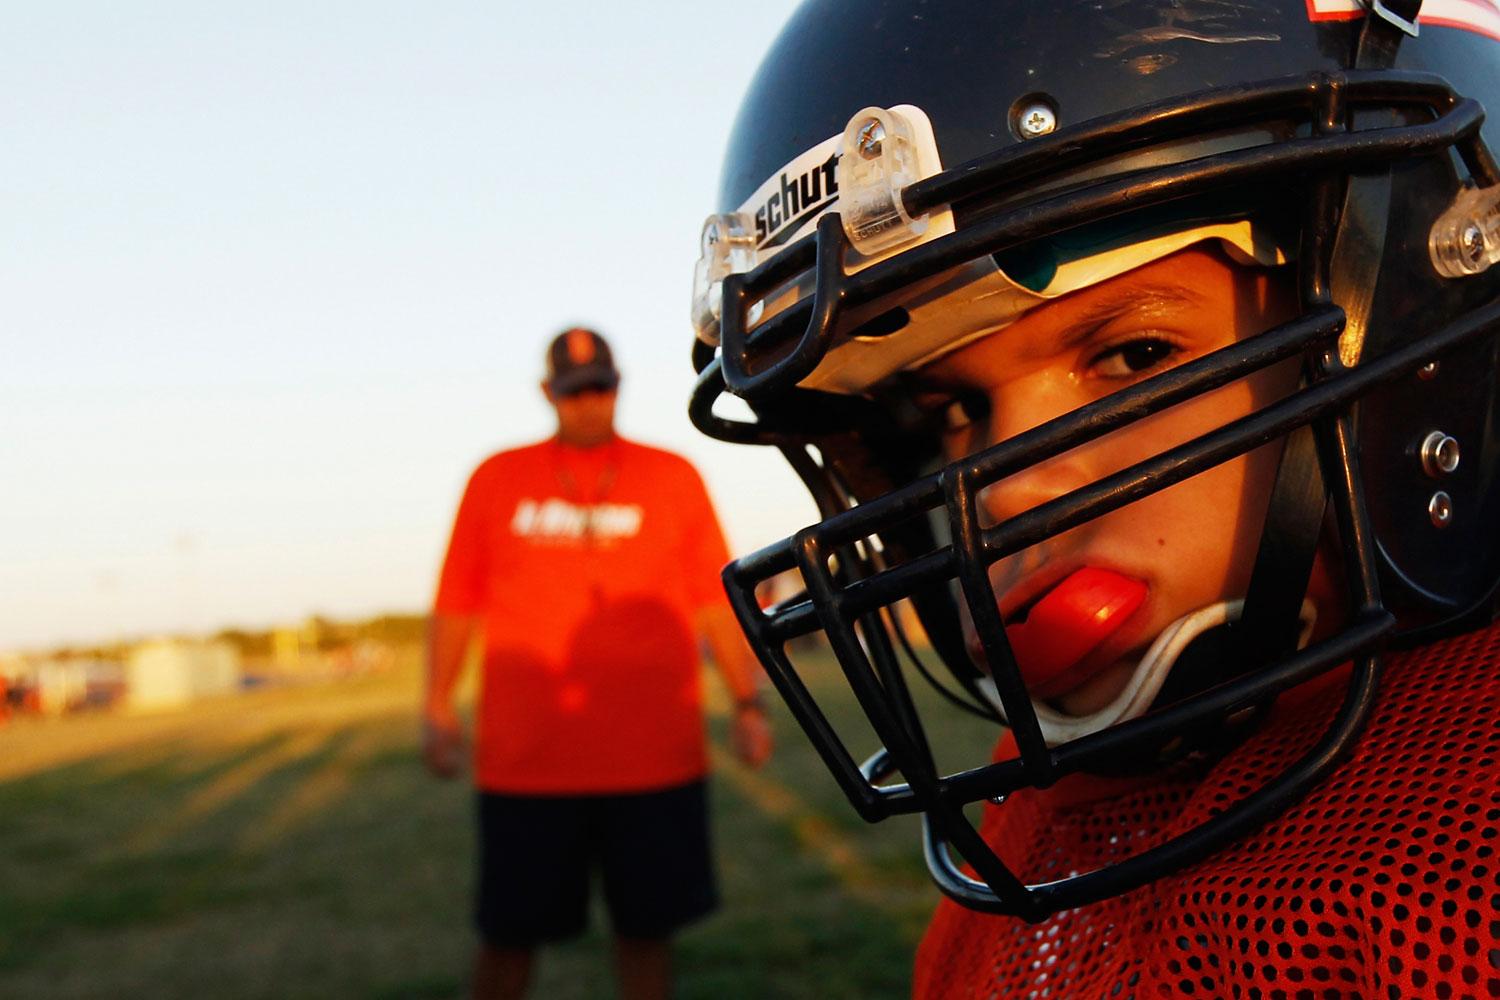 A youngster chews on his mouthguard during the filming of the television docu-series "Friday Night Tykes" in San Antonio, Texas.